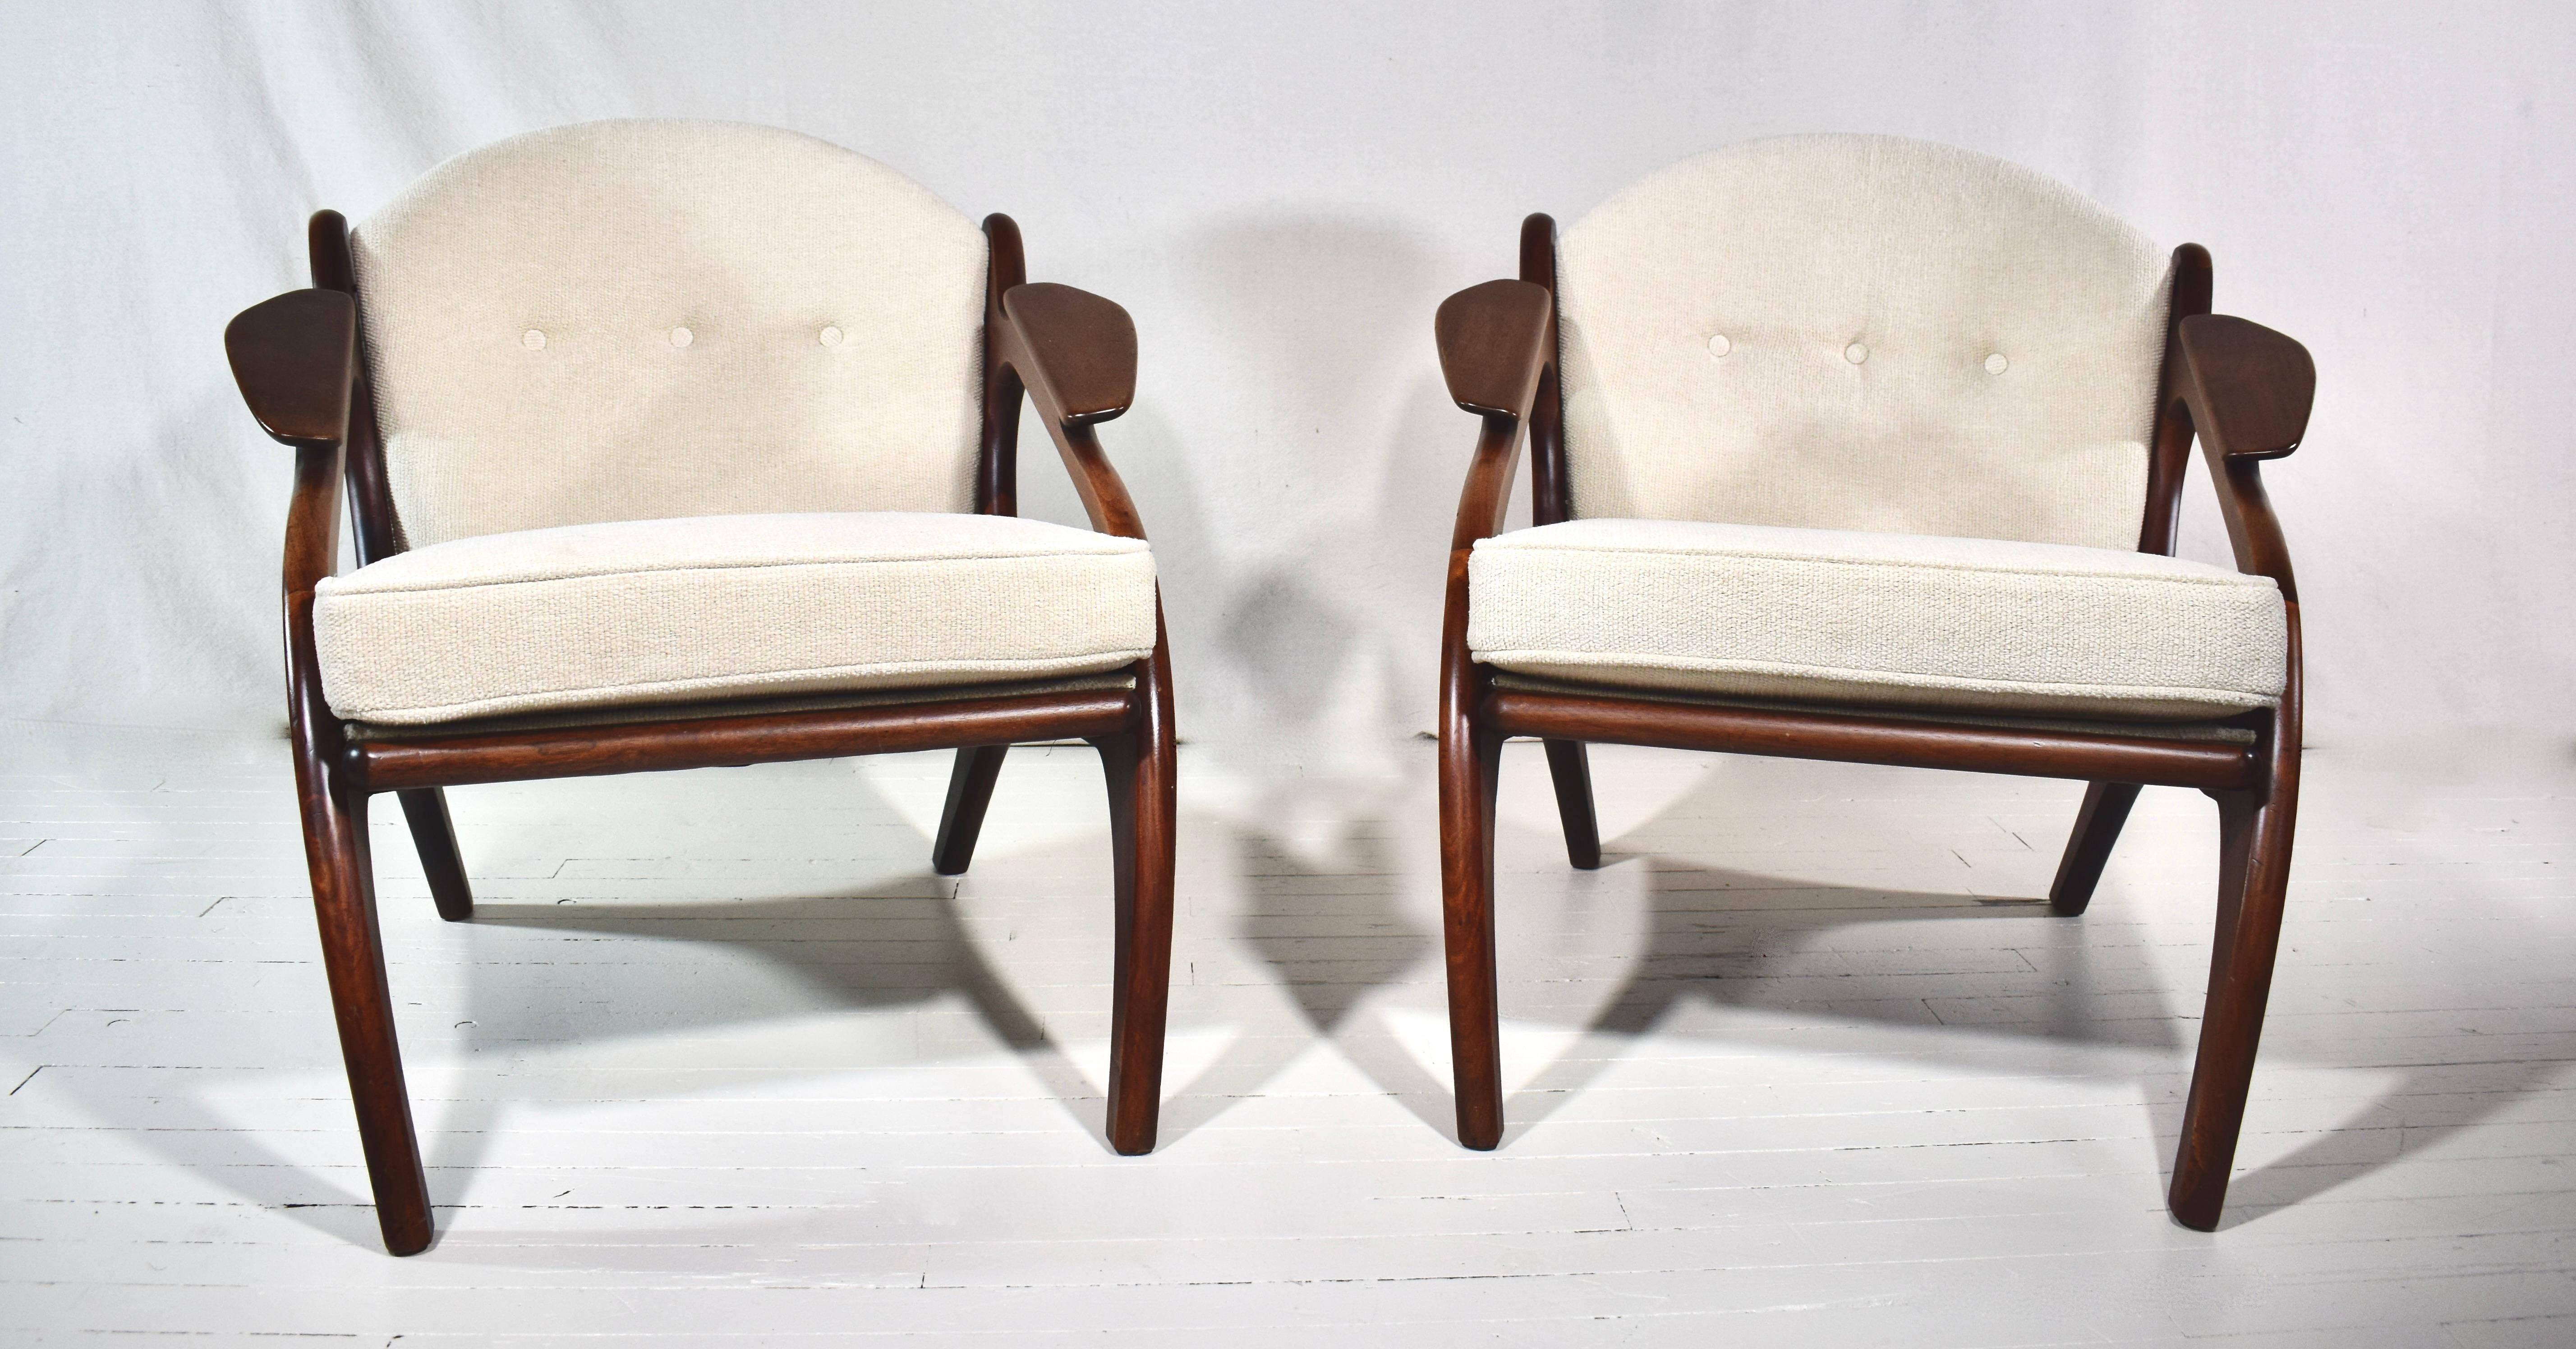 Sculptural Mid-Century Modern lounge chairs Model 2249-C designed by Adrian Pearsall for Craft Associates in the United States, circa 1960s. This elegant and ergonomic lounge chair features a solid walnut angled base and sculpted wood padded arms